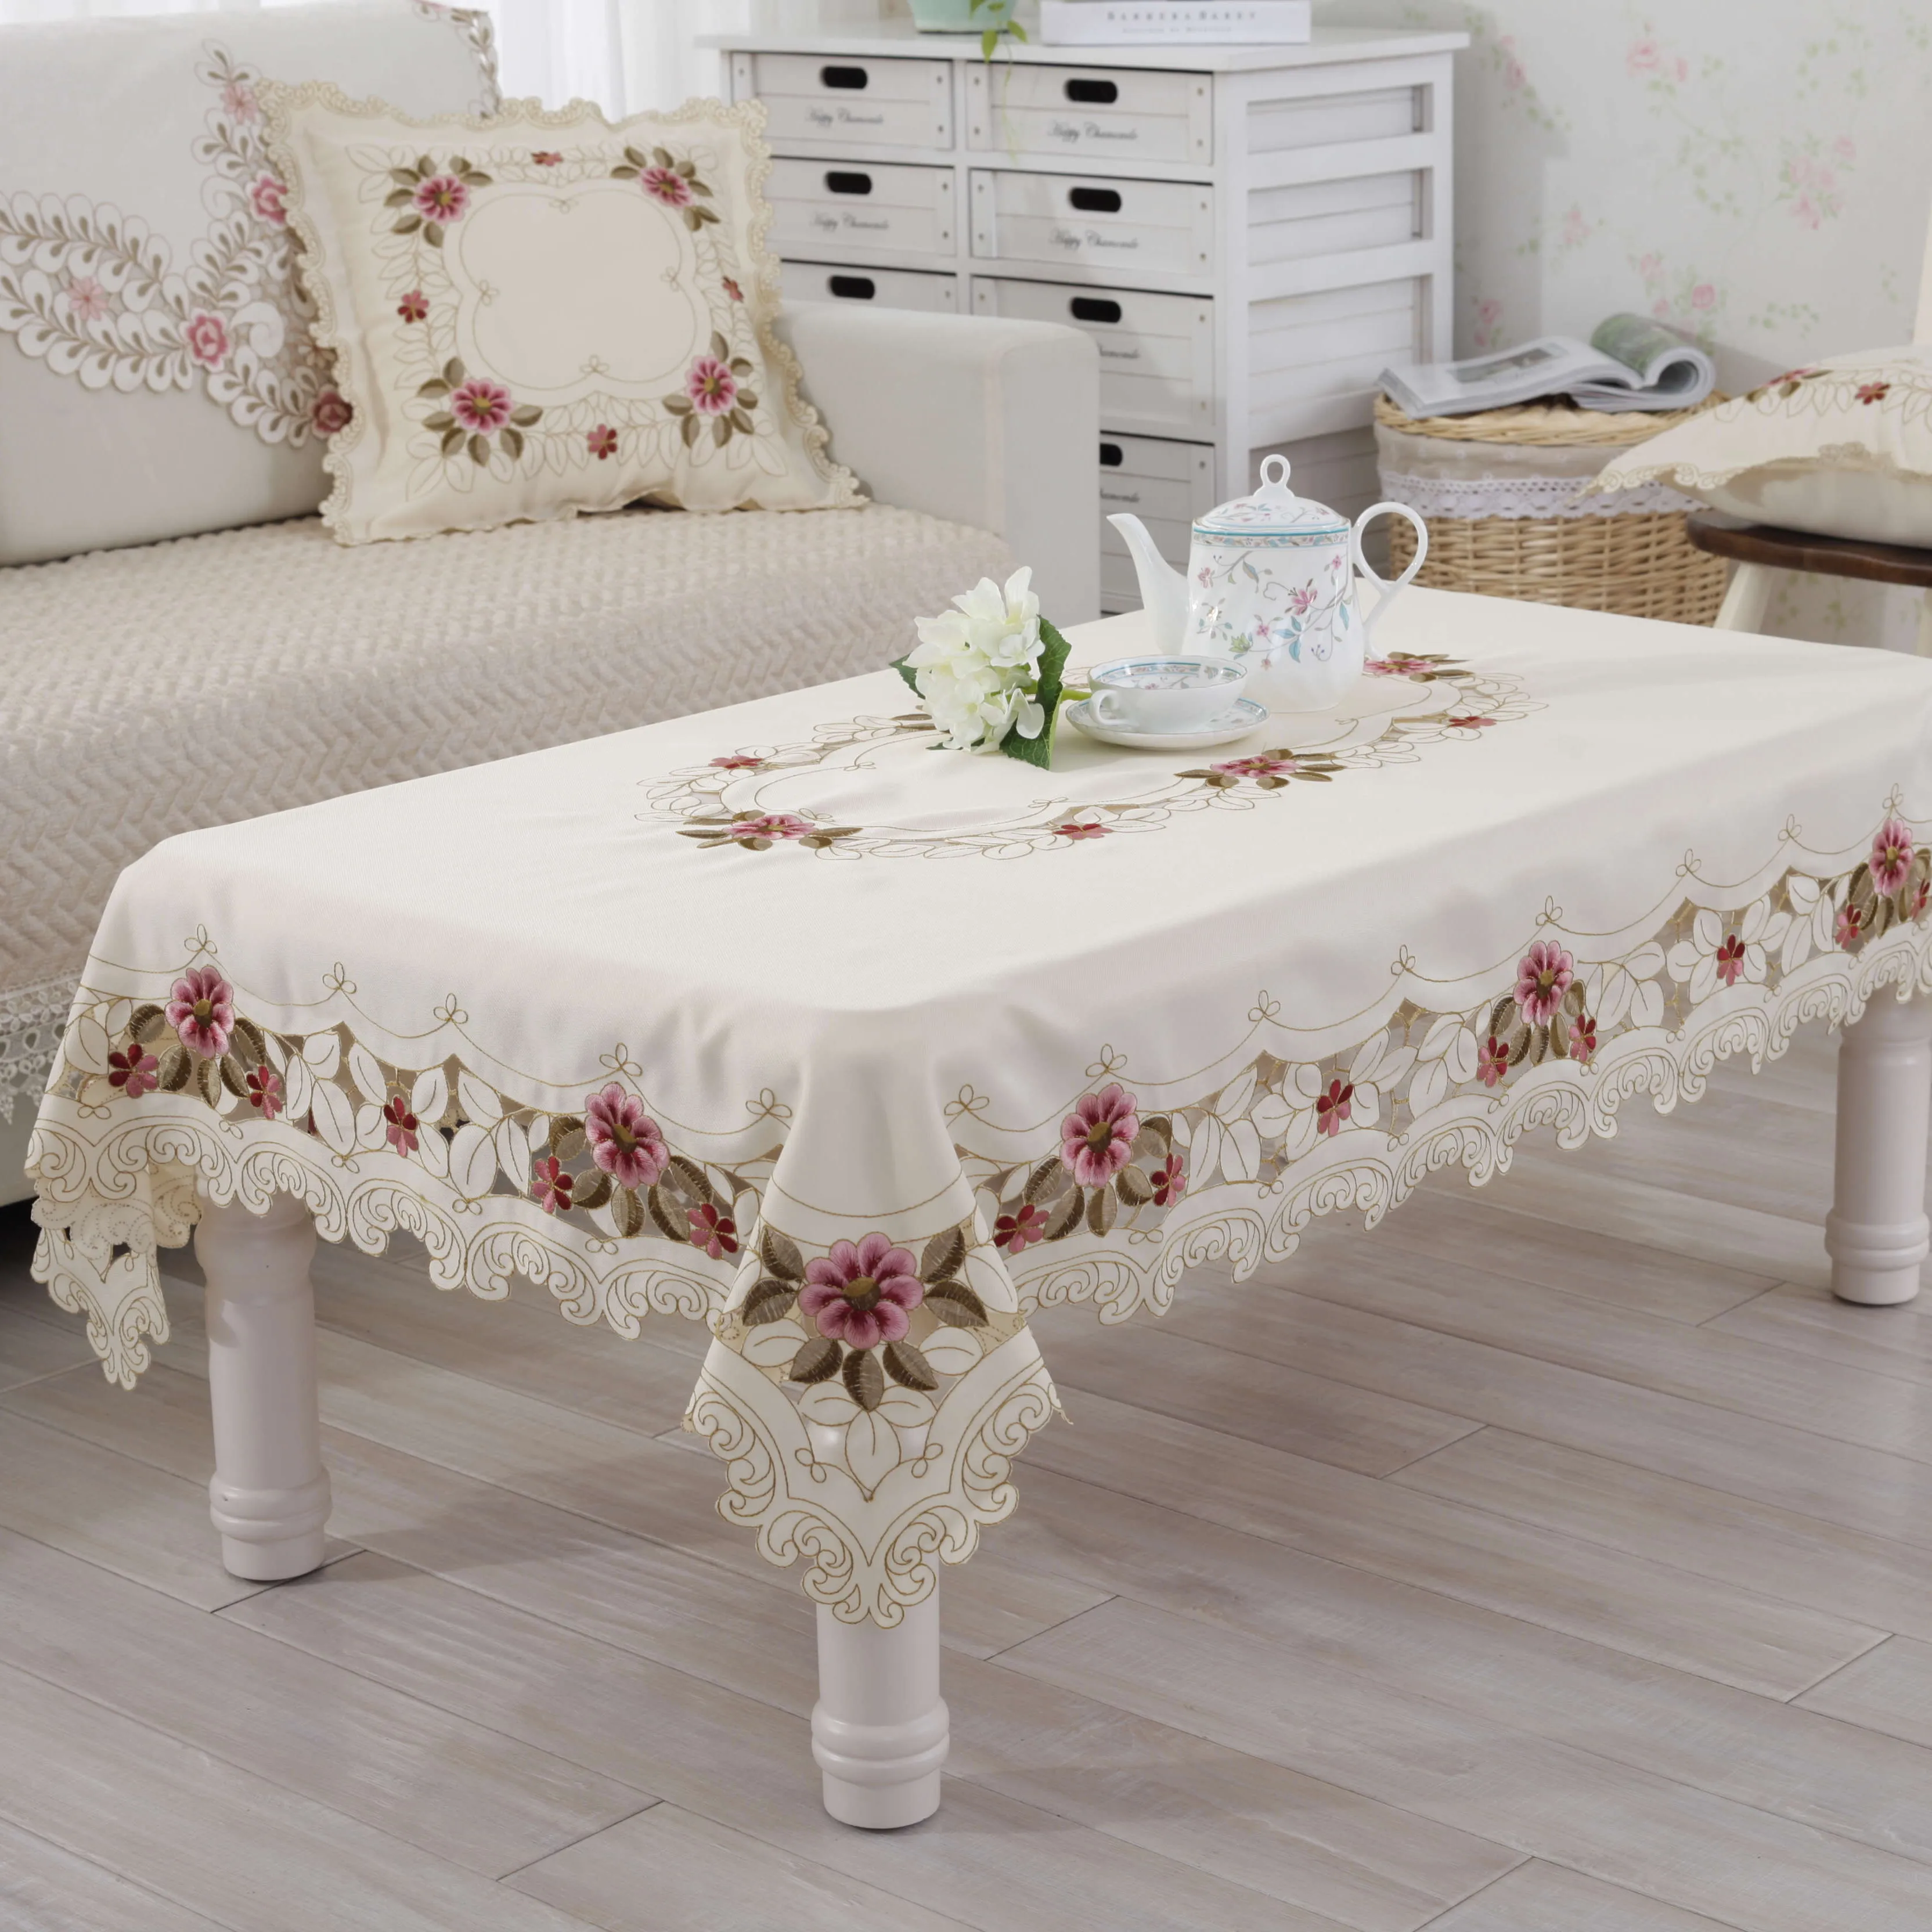 Chinese Embroidered Tablecloth Cloth Art Pastoral Tablecloth Cotton Linen Tablecloth Small Fresh And Simple Round Table Cloth